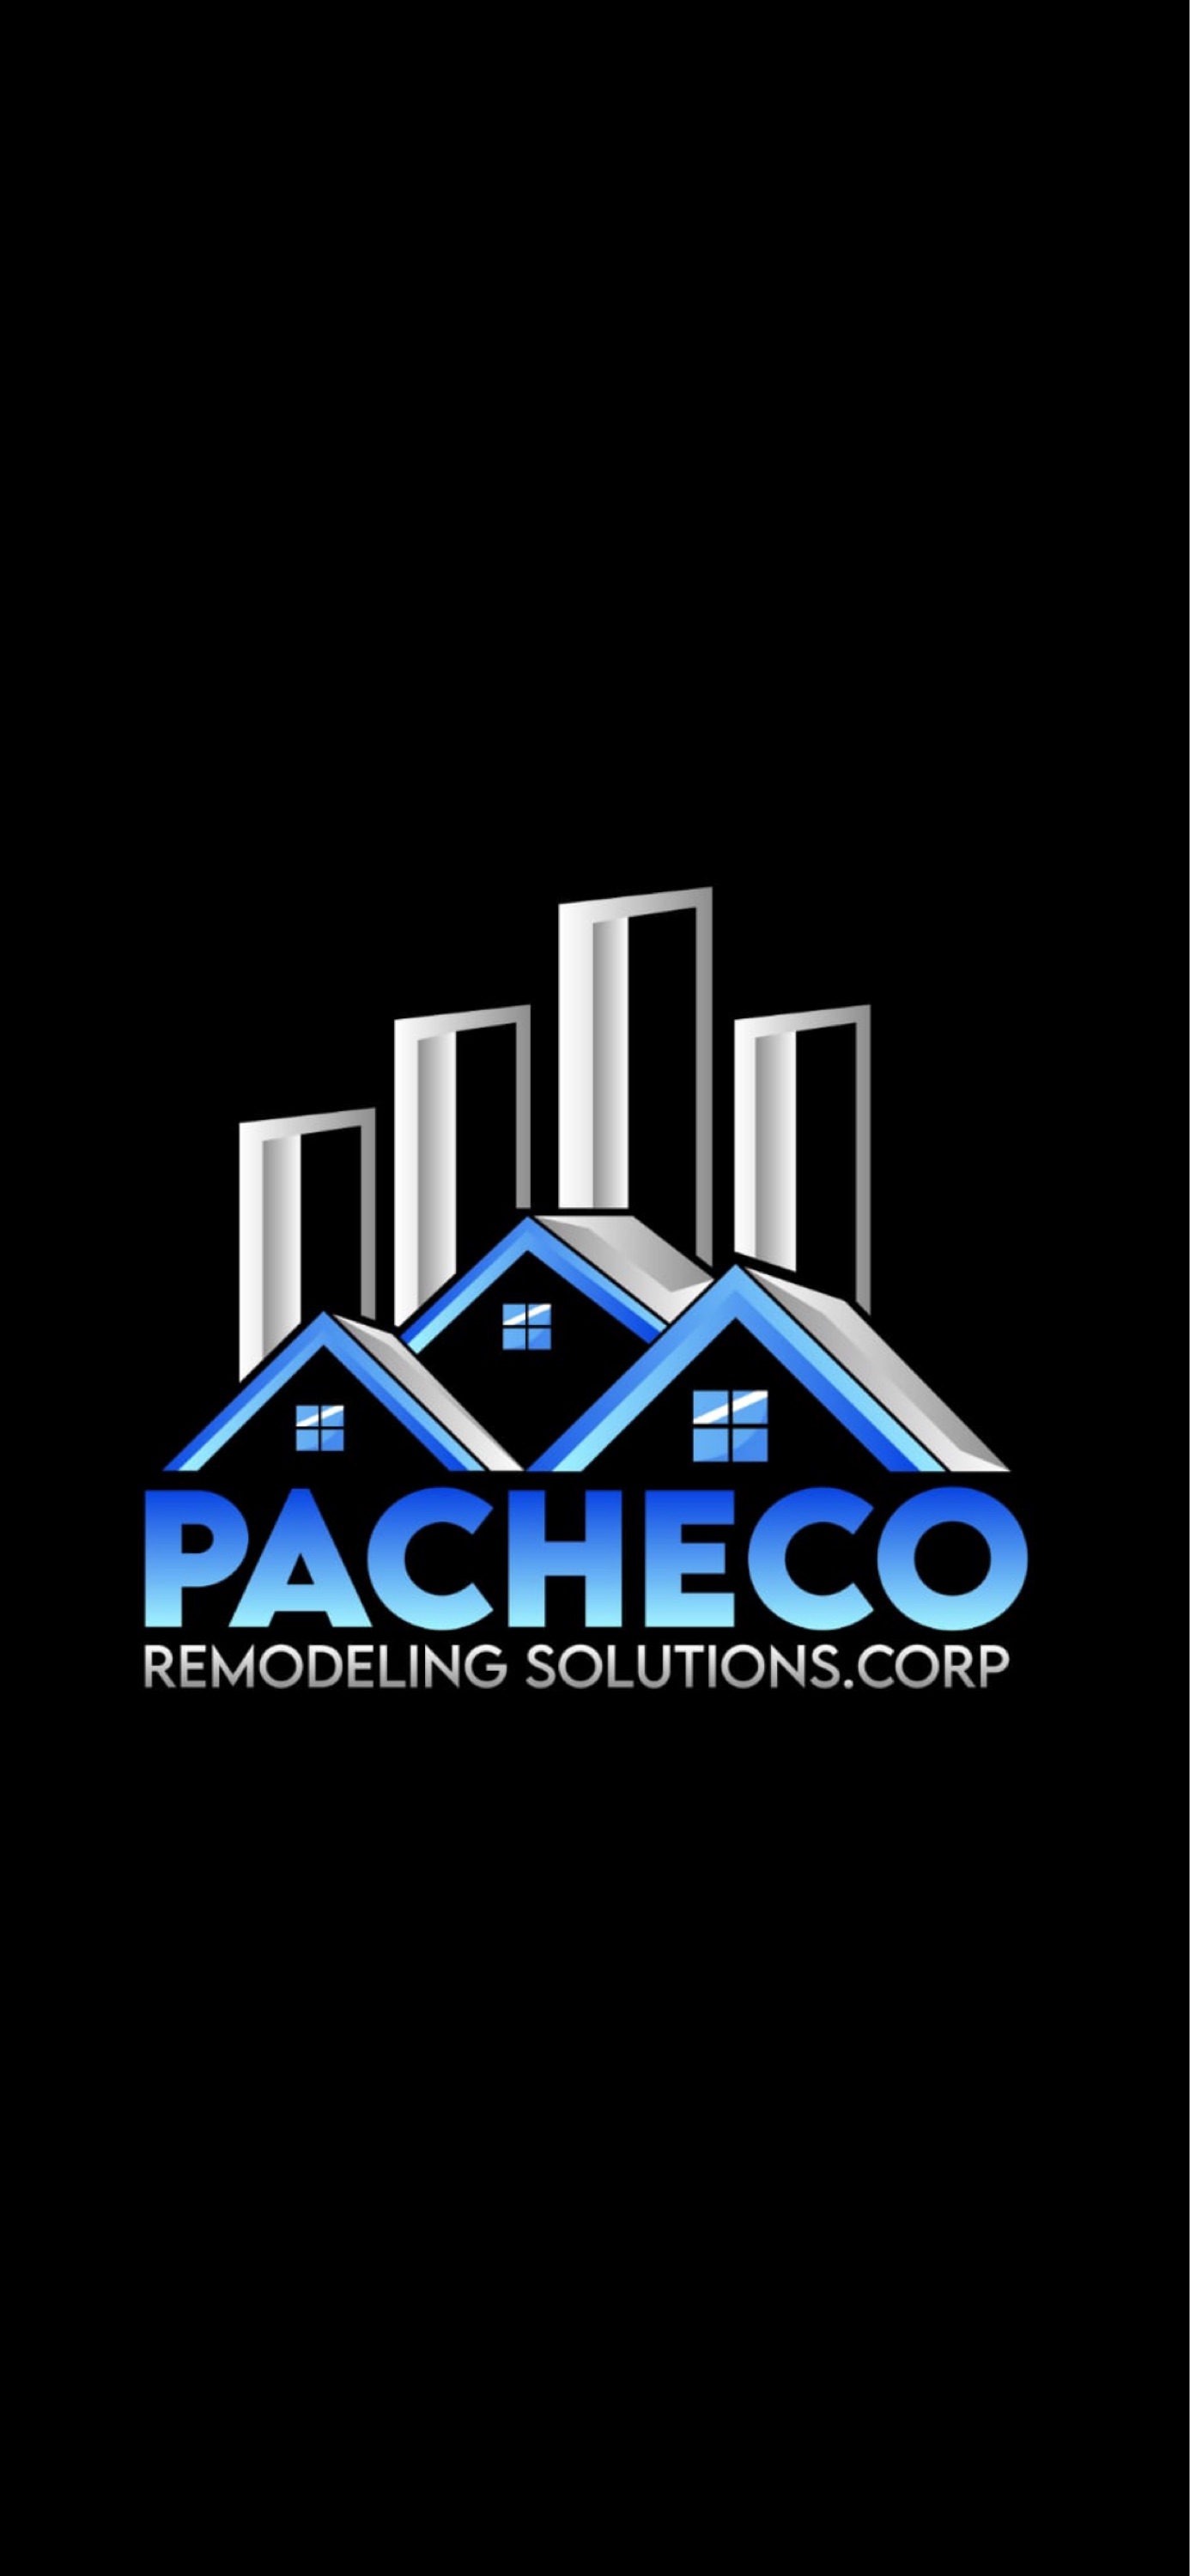 Pacheco Remodeling Solutions Corp. Logo